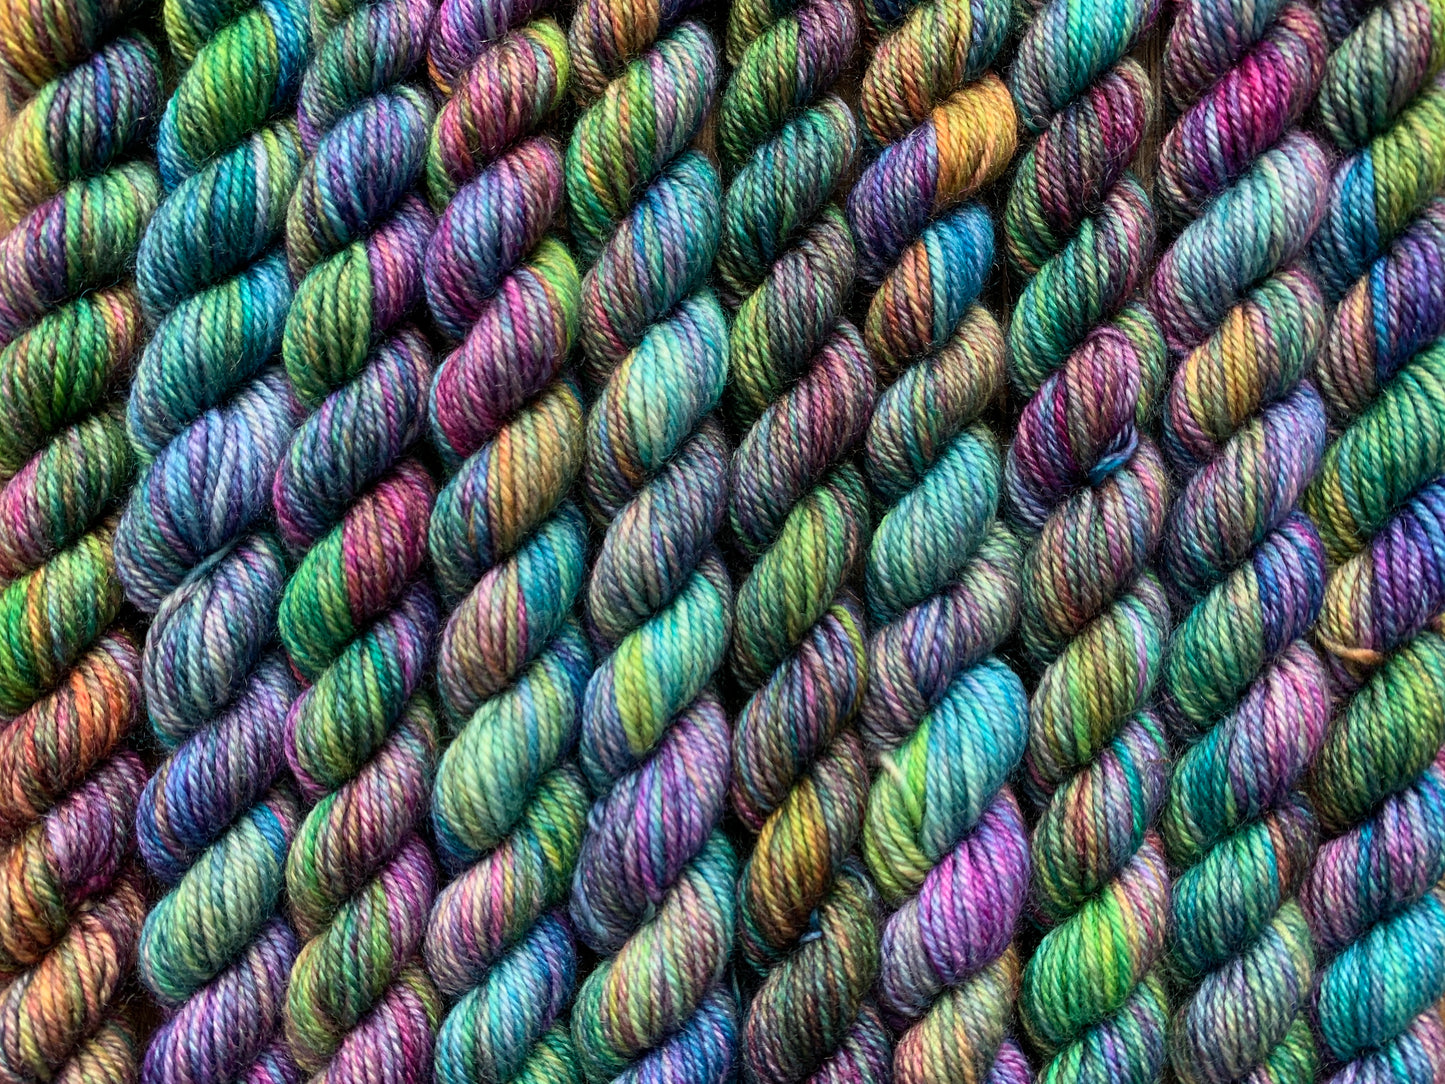 Dream in Color Butterfly BFL